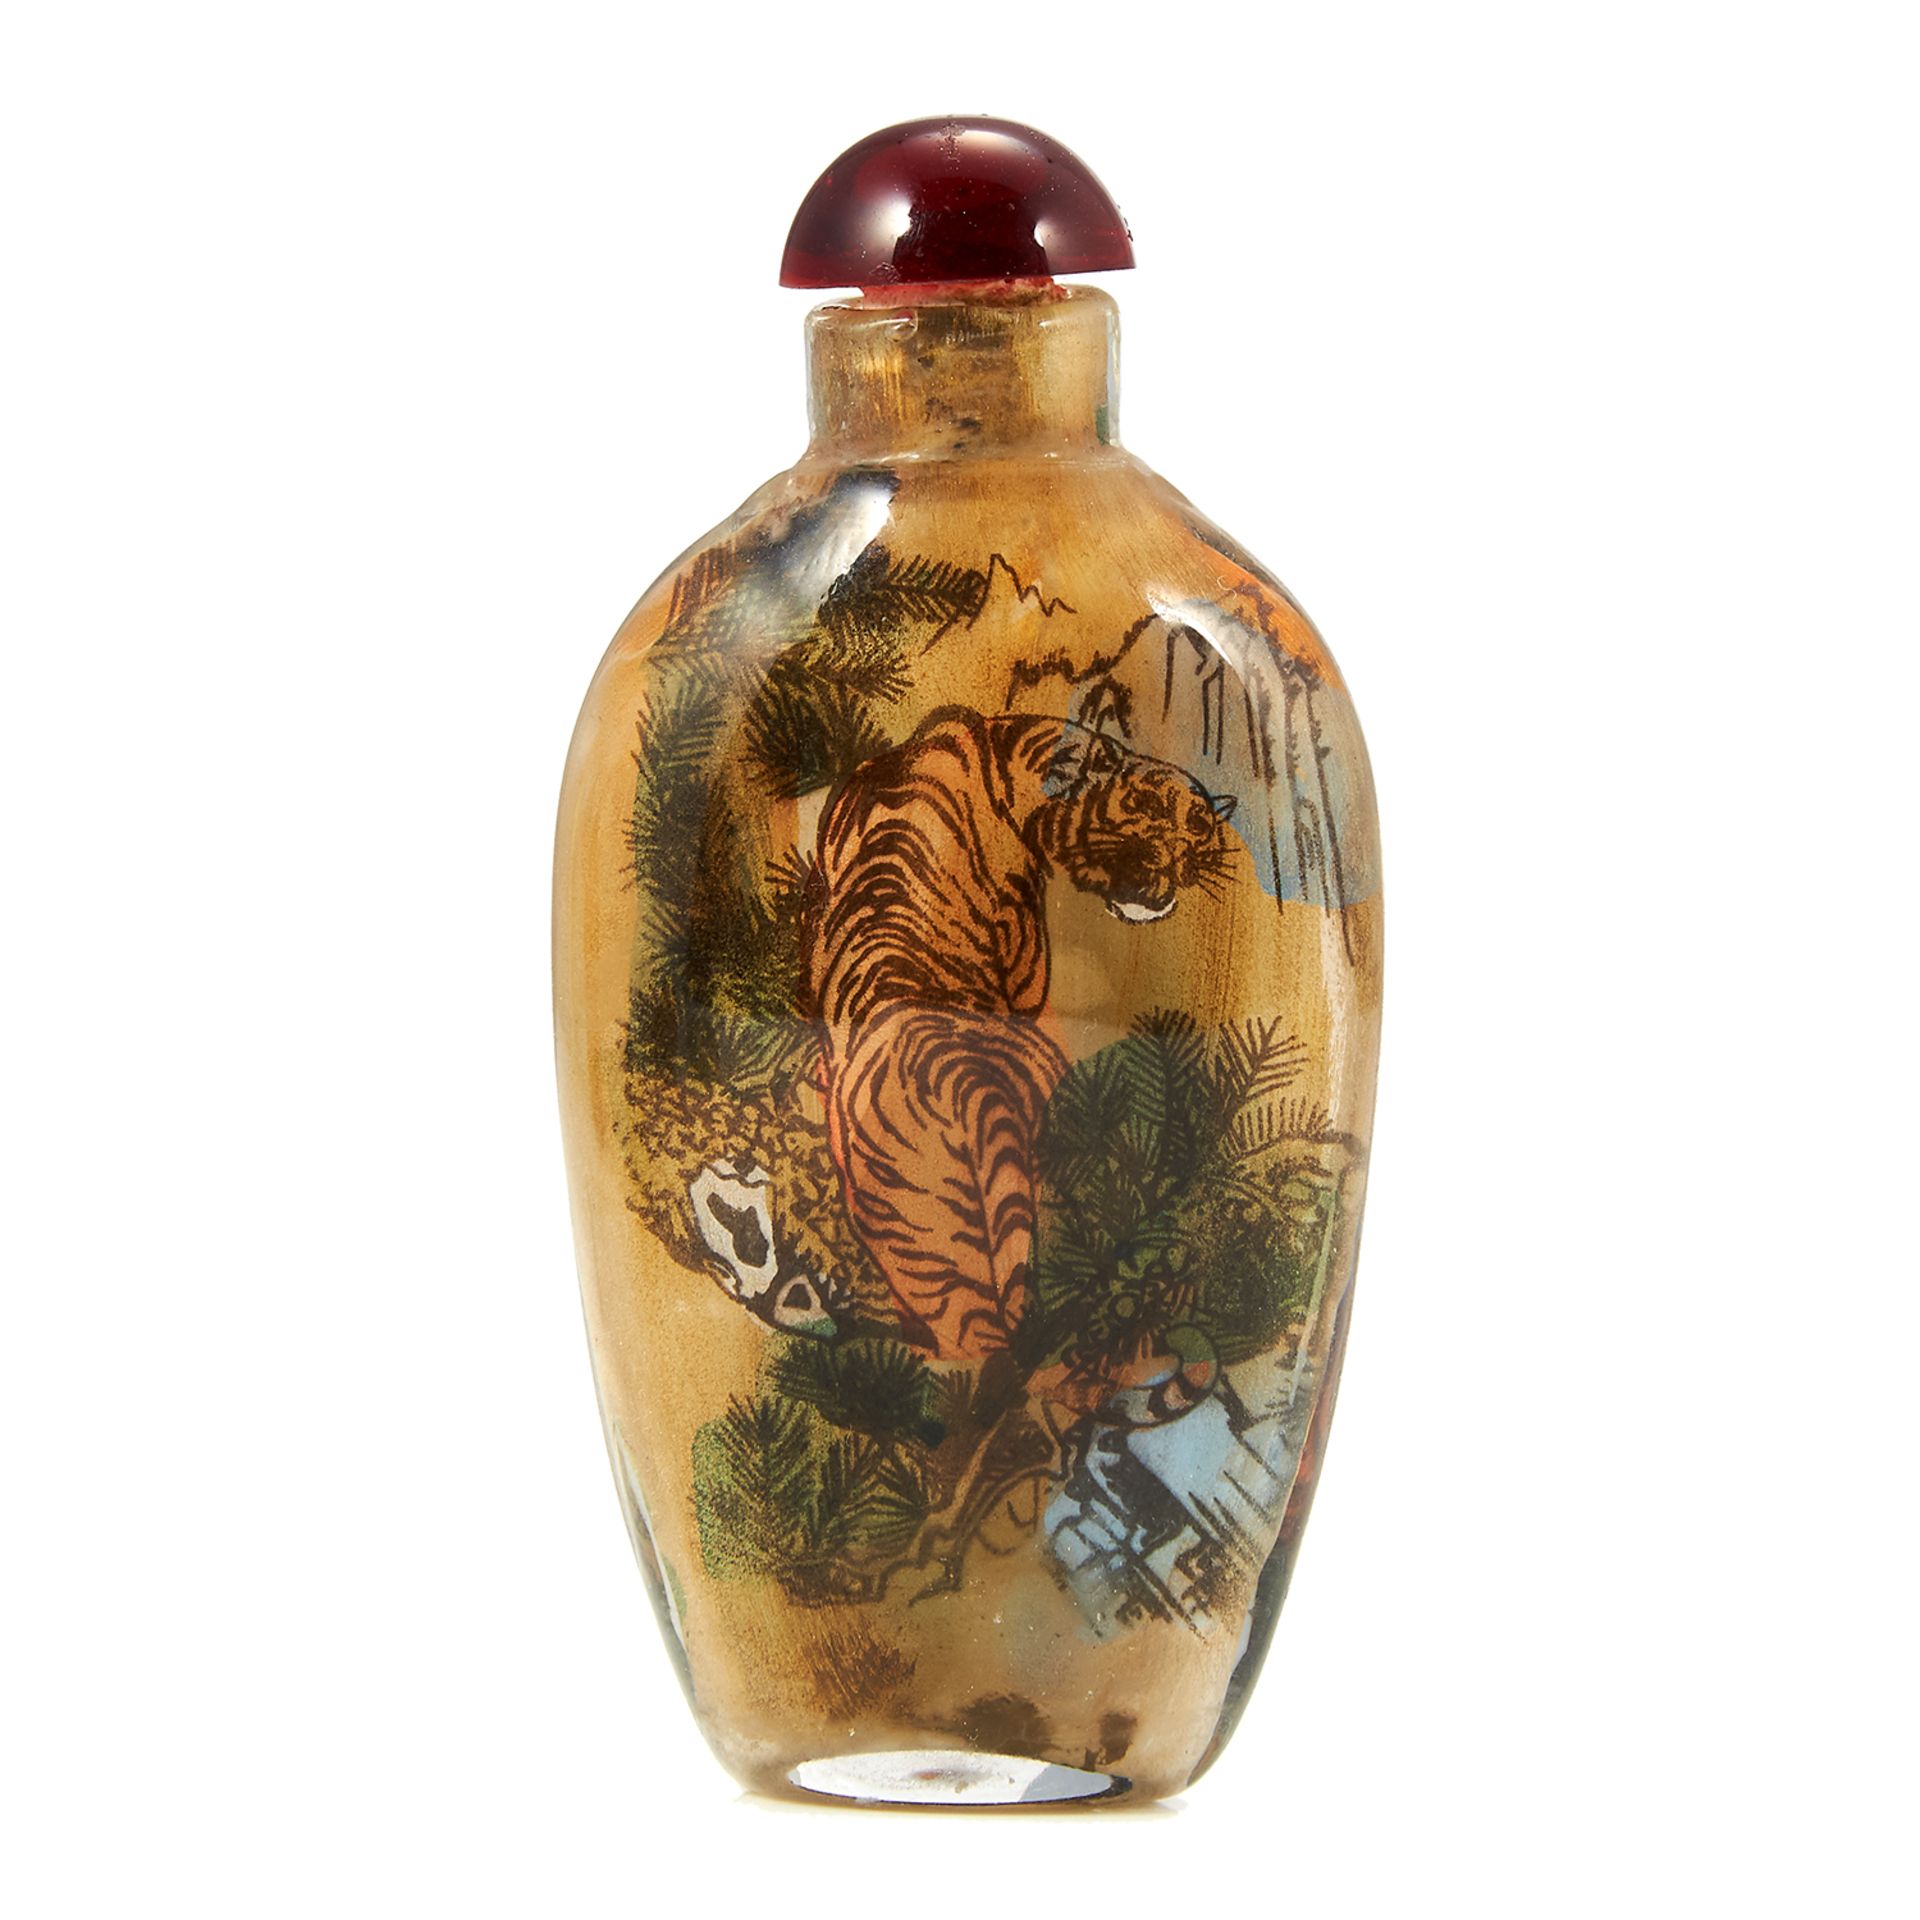 AN ANTIQUE CHINESE PAINTED GLASS SNUFF BOTTLE, EARLY 20TH CENTURY each side depicting a tiger